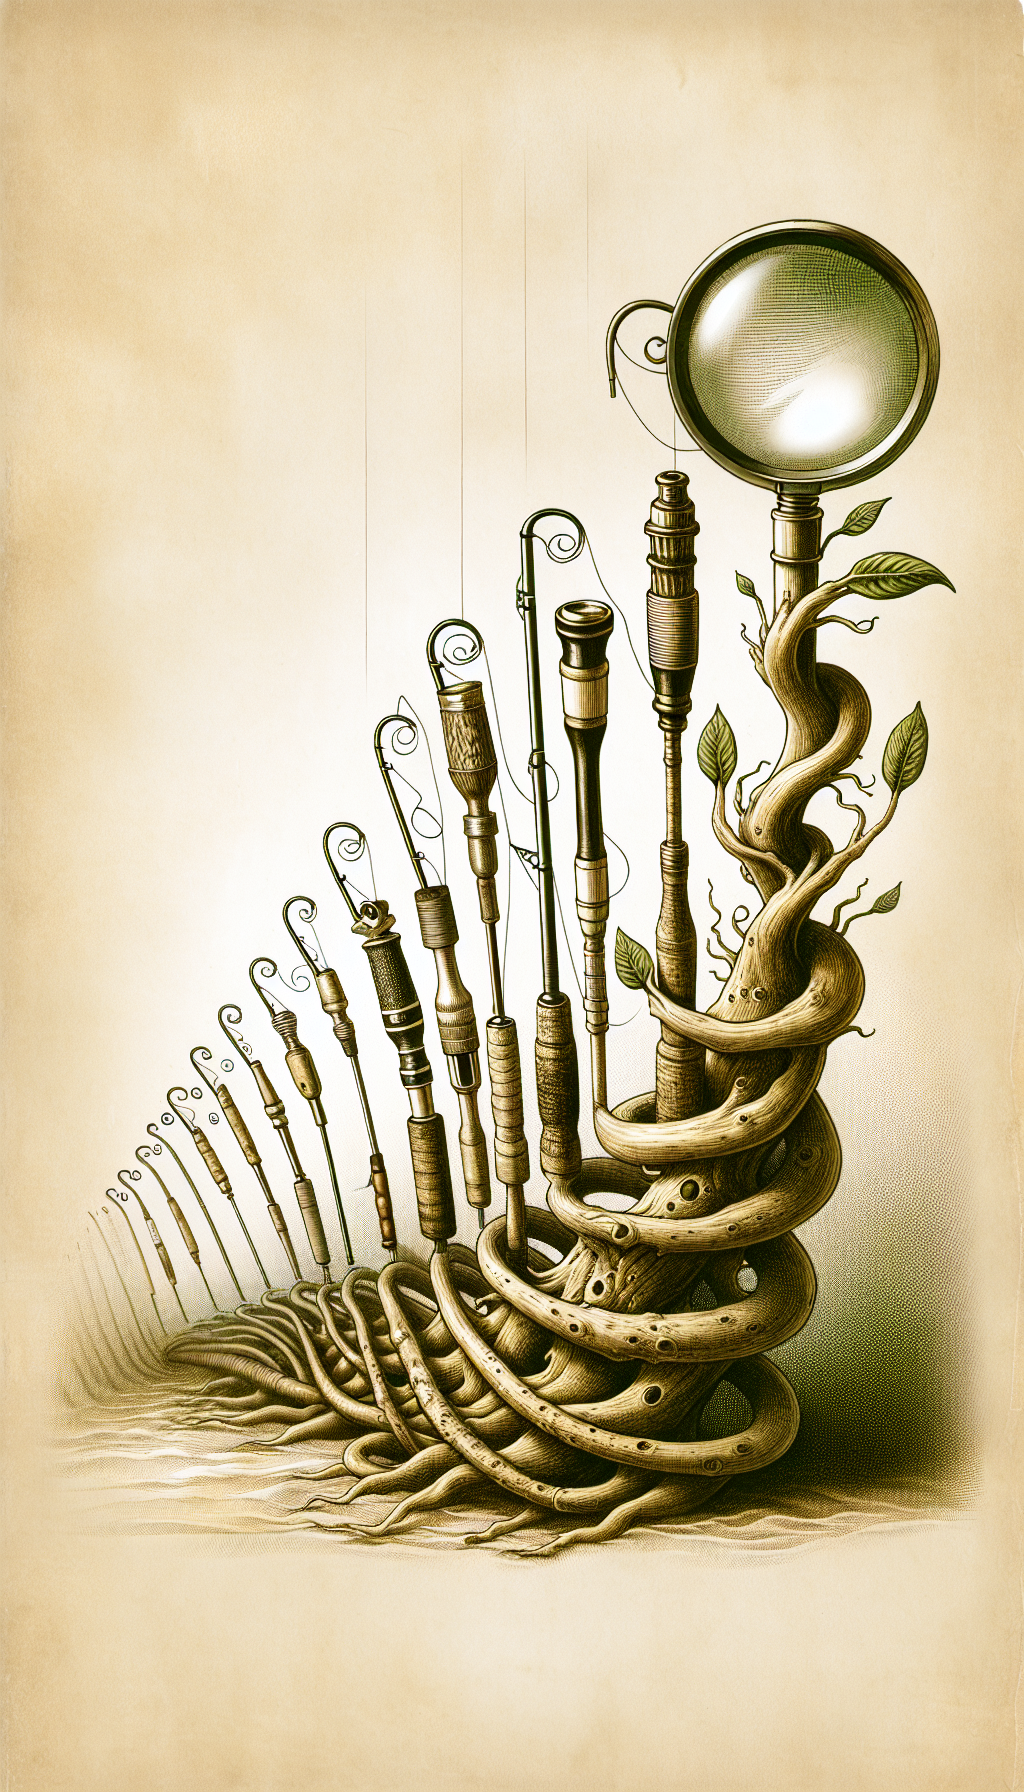 A whimsical illustration depicts a spiraling timeline with distinctively styled vintage fishing rods sprouting like plant stalks, marking significant eras. At the base, a magnifying glass hovers over an intricate, sepia-toned sketch of an ancient rod, while modern versions progressively evolve with color and complexity as the timeline ascends, culminating in a sleek, state-of-the-art rod at the apex.